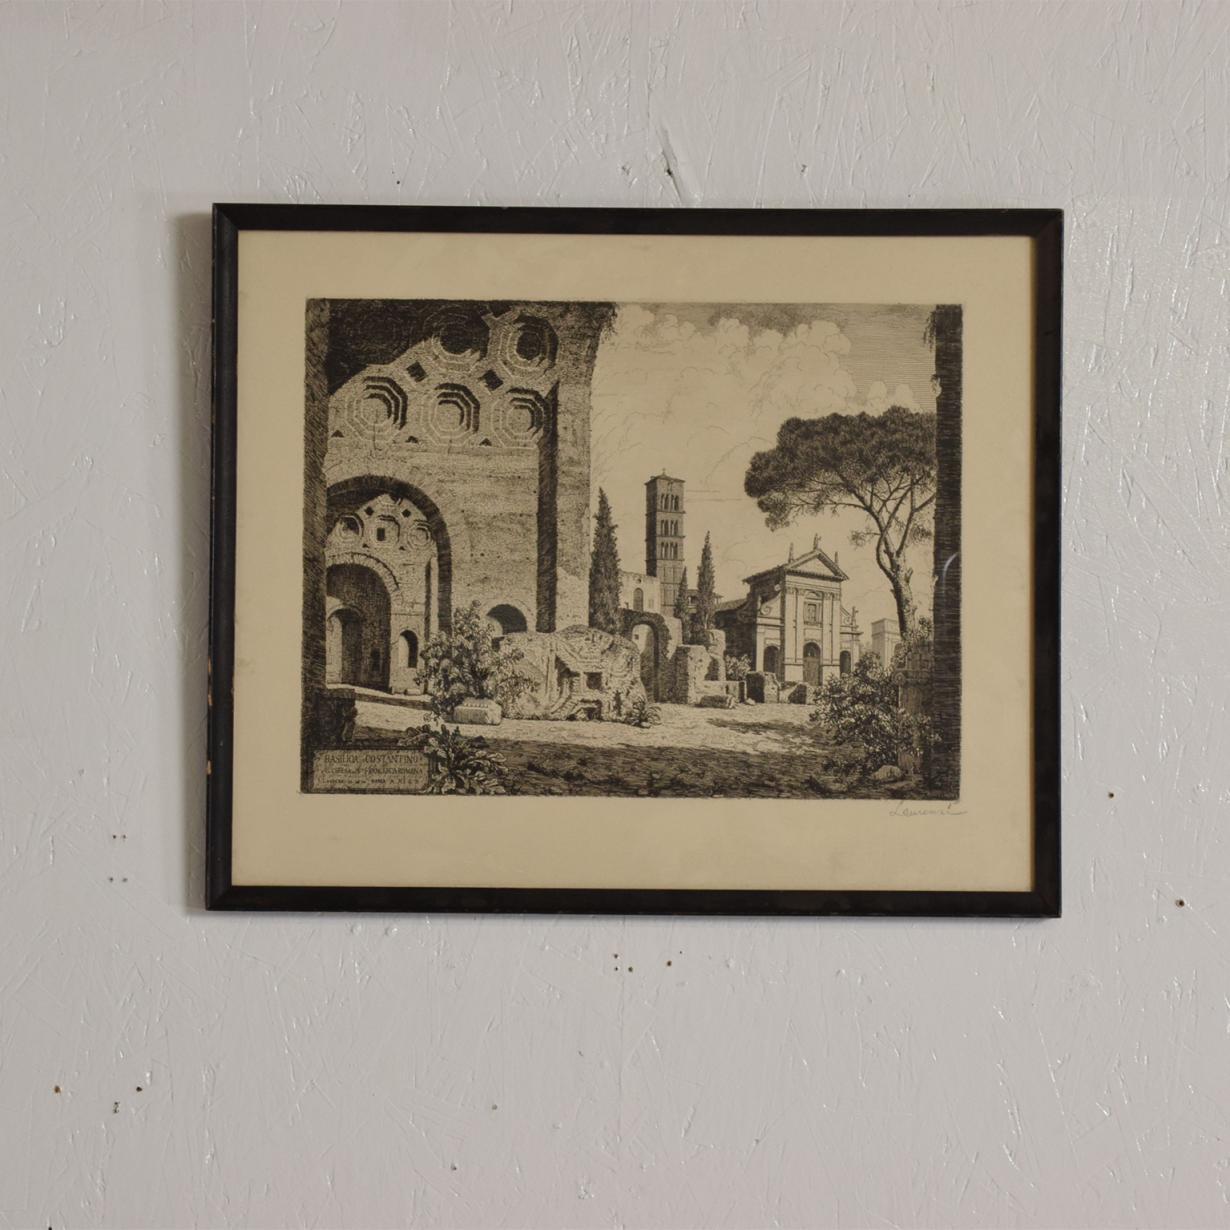 Drawing
Vintage 1960s architectural etching pen drawing on paper. Made in Italy. Signed Laurenzi.
Black ink on paper. Secret message in the drawing, a mirror is required for reverse handwriting. The inscription message is in Latin or